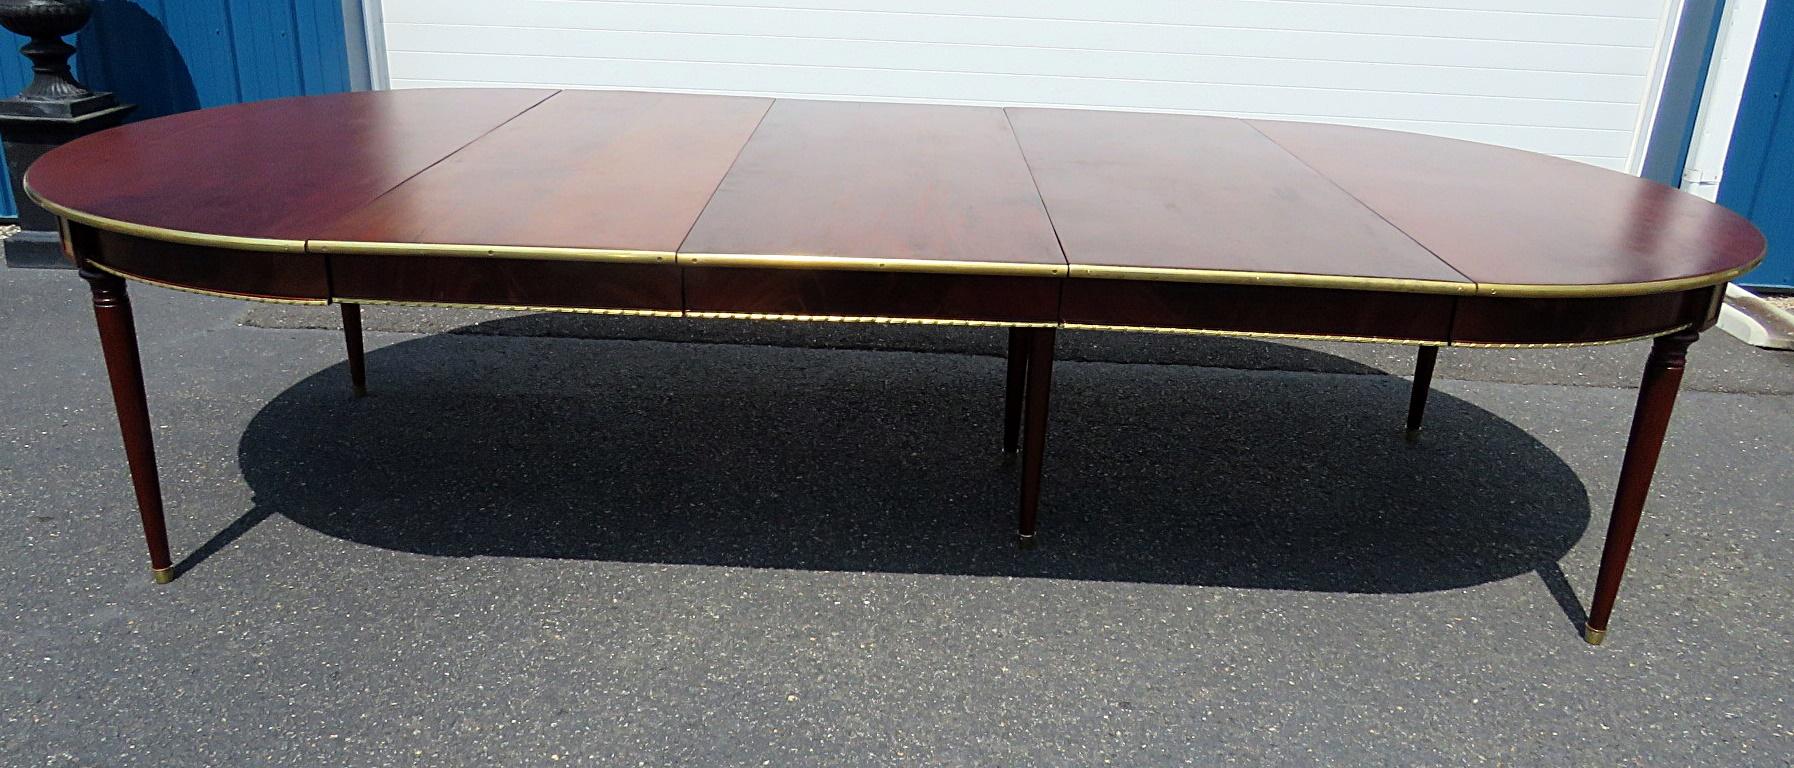 Maison Jansen Directoire Style Dining Room Table In Good Condition For Sale In Swedesboro, NJ